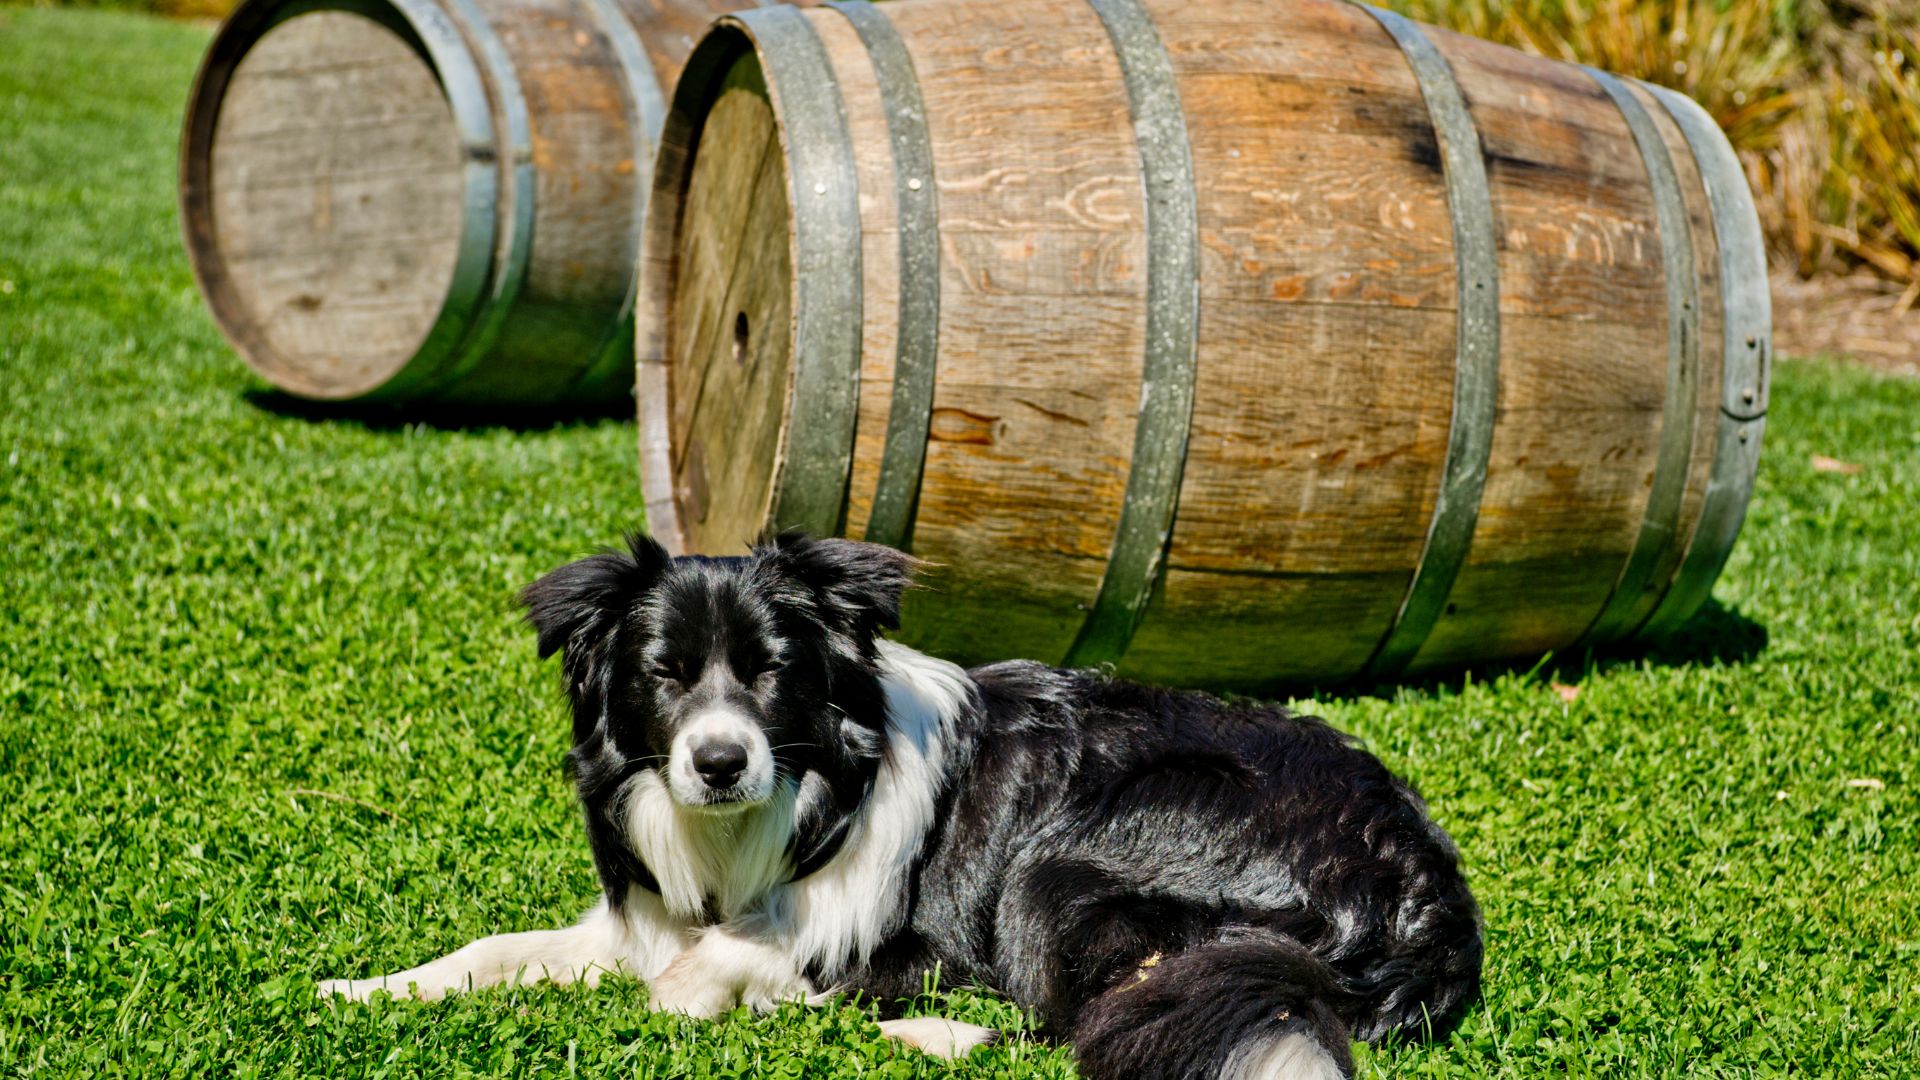 Black and white border collie lying in the grass next to two wine barrels